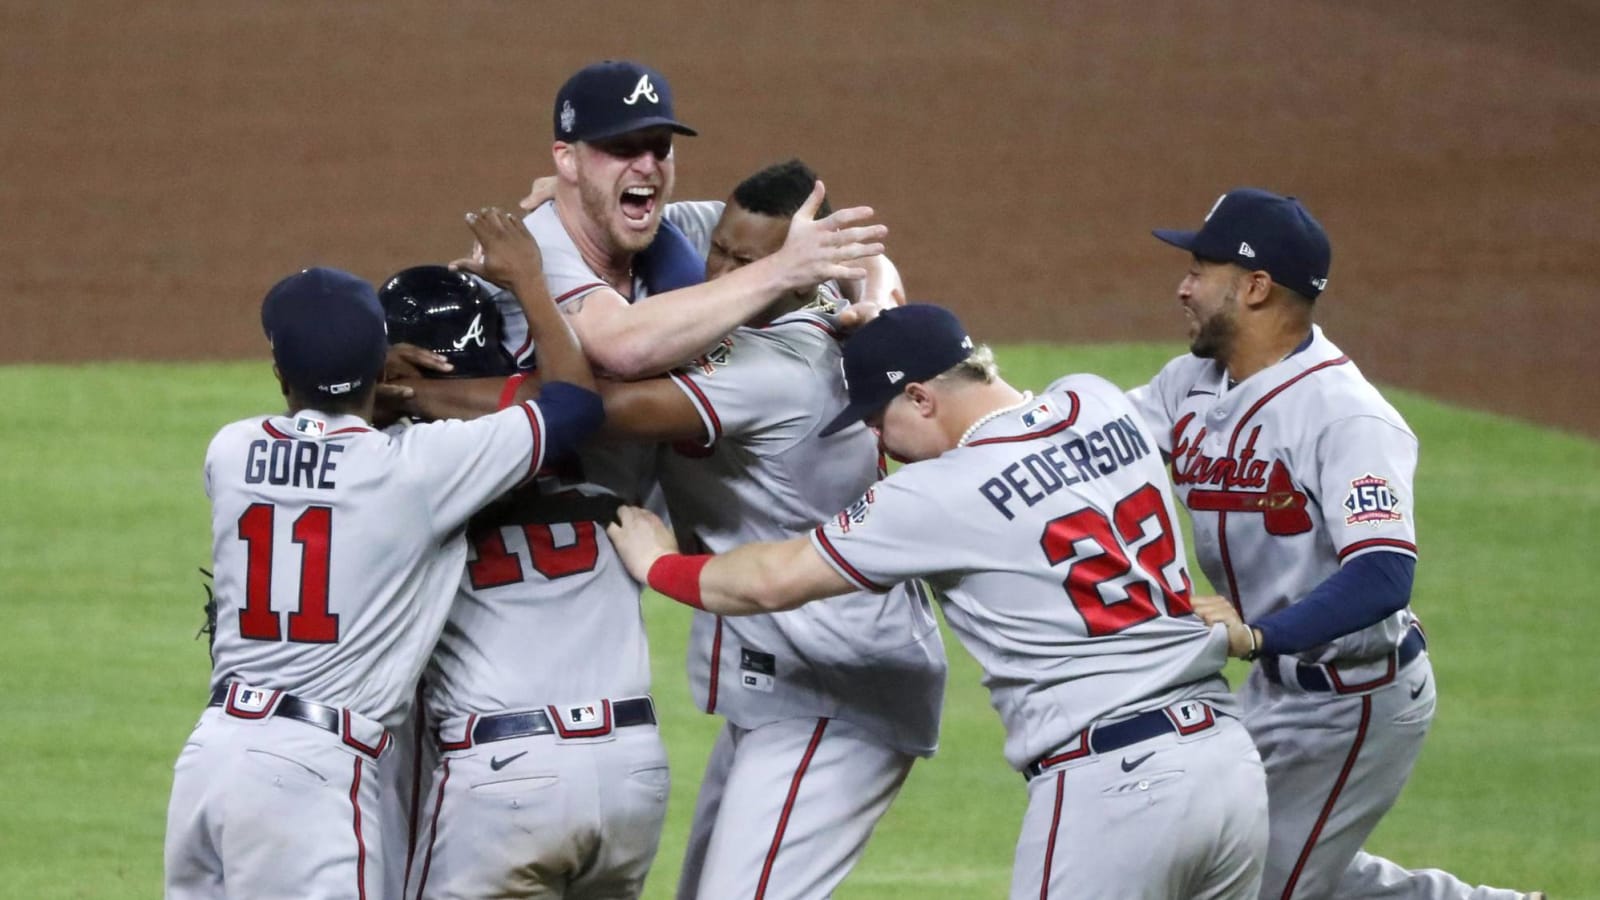 Nationals rub it in to Astros in congratulating Braves on Series win